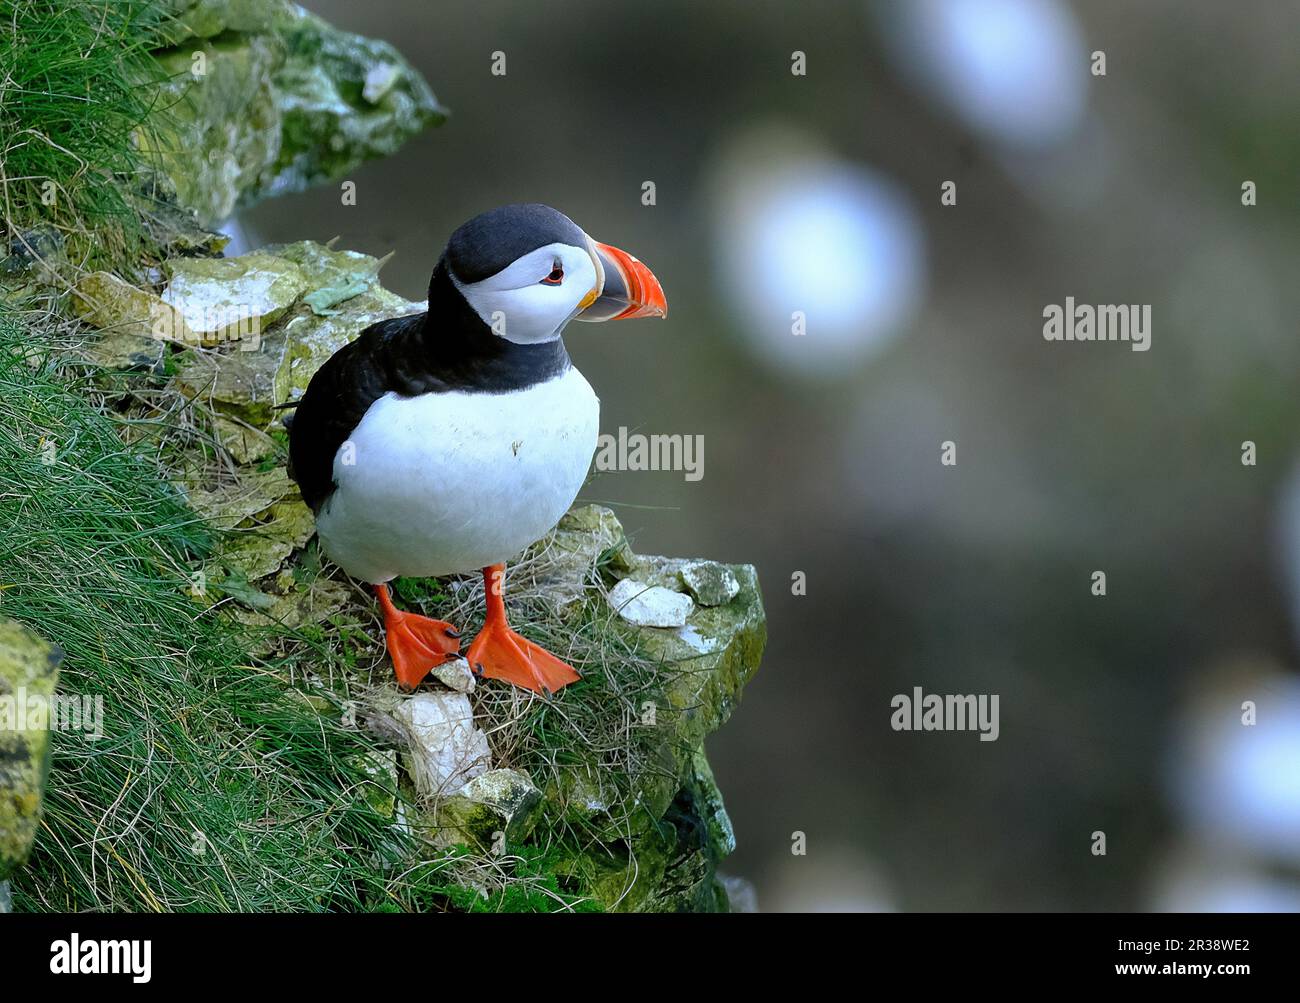 Puffins are any of three species of small alcids in the bird genus Fratercula. These are pelagic seabirds that feed primarily by diving in the water Stock Photo